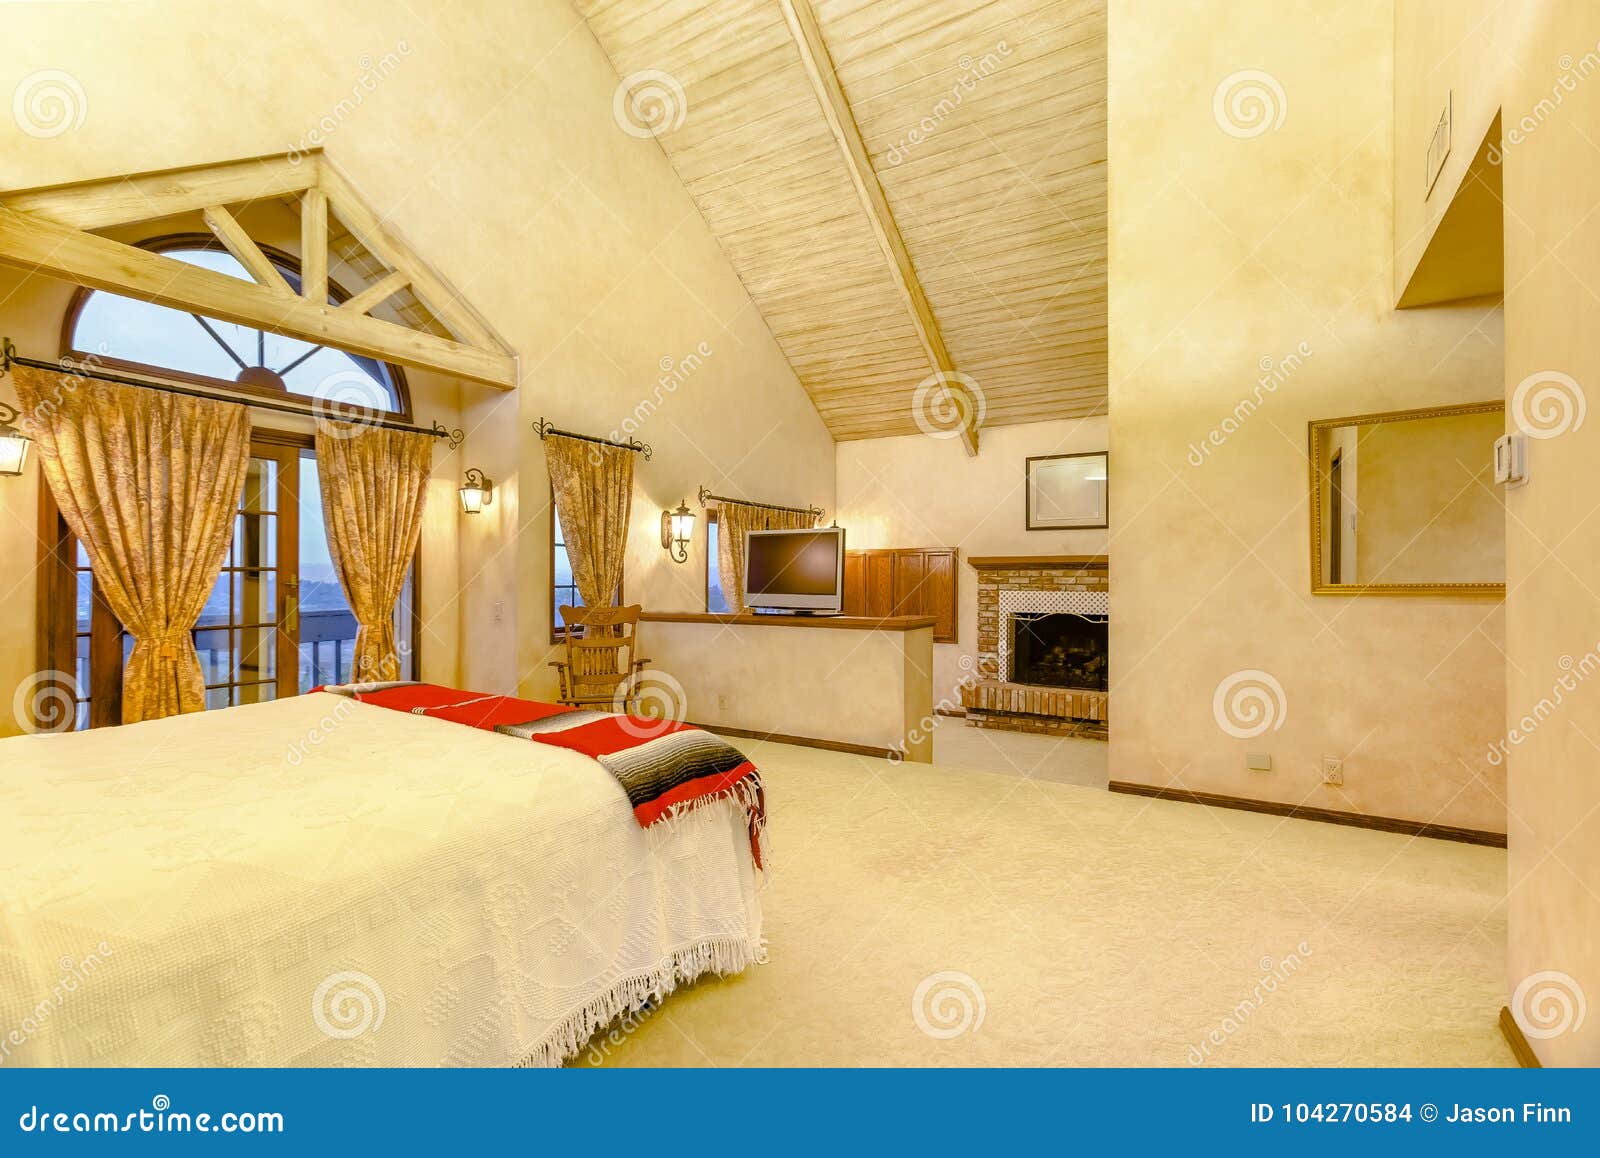 Bright Open And Warm Master Bedroom With Vaulted Ceilings